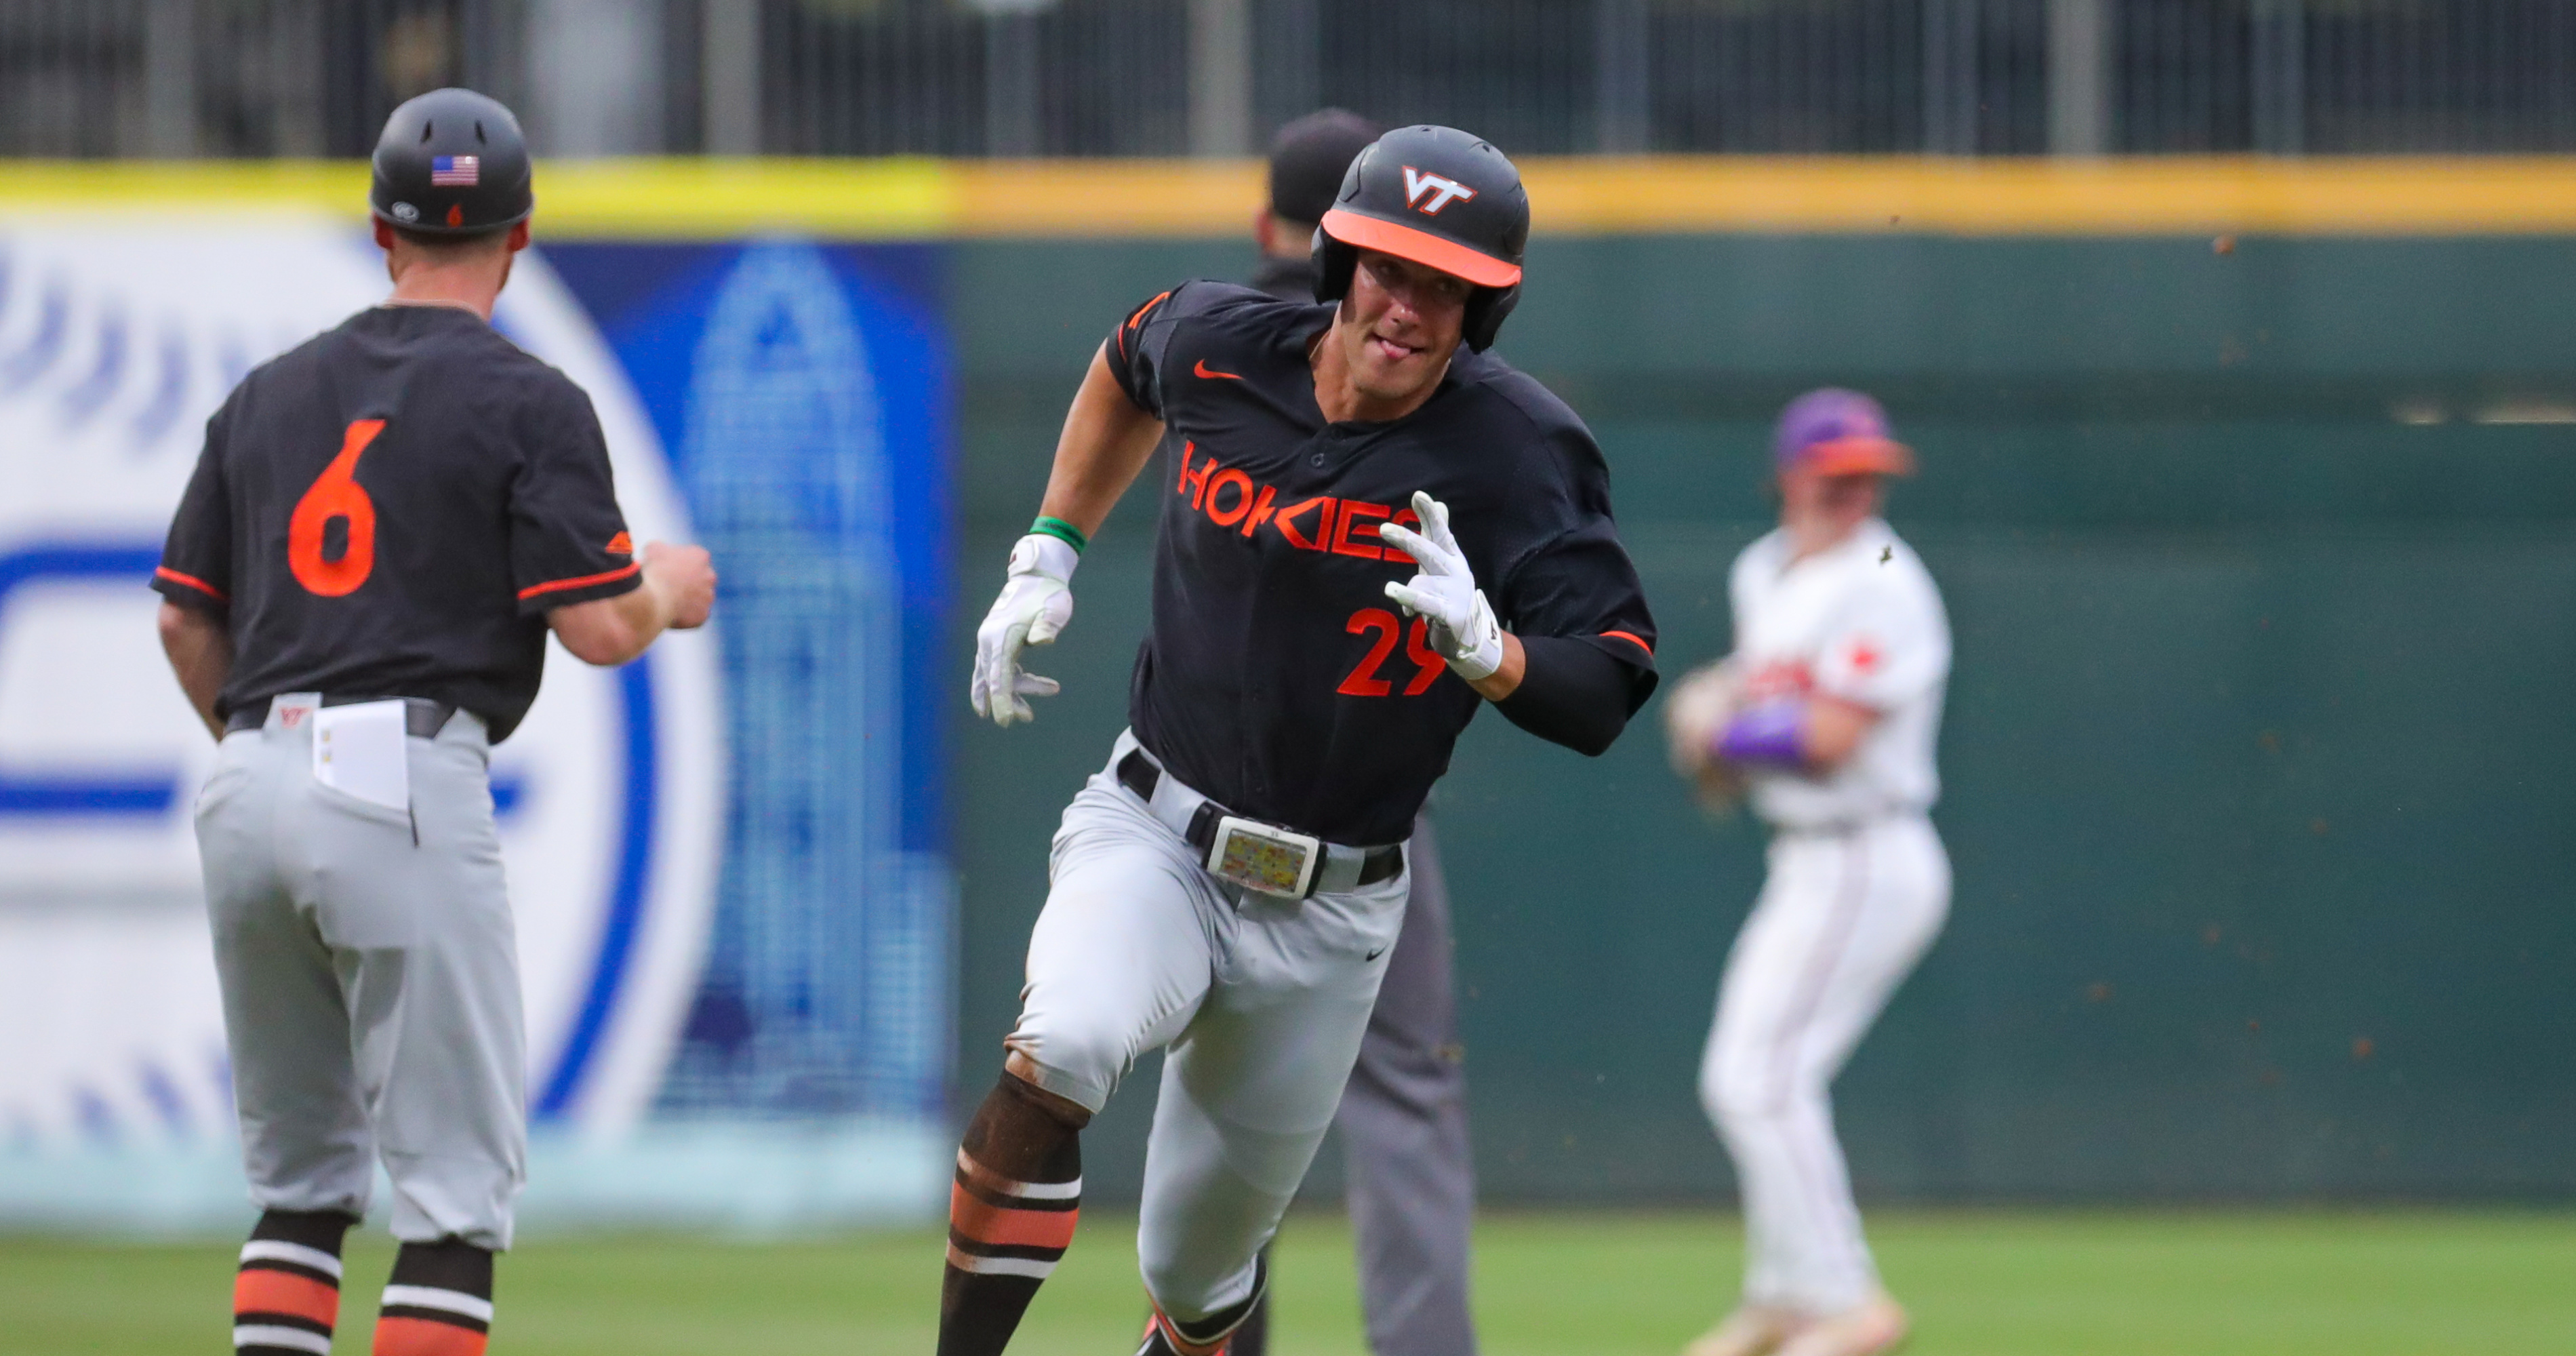 ACC Baseball Tournament 2022: Friday Scores, Updated Bracket and